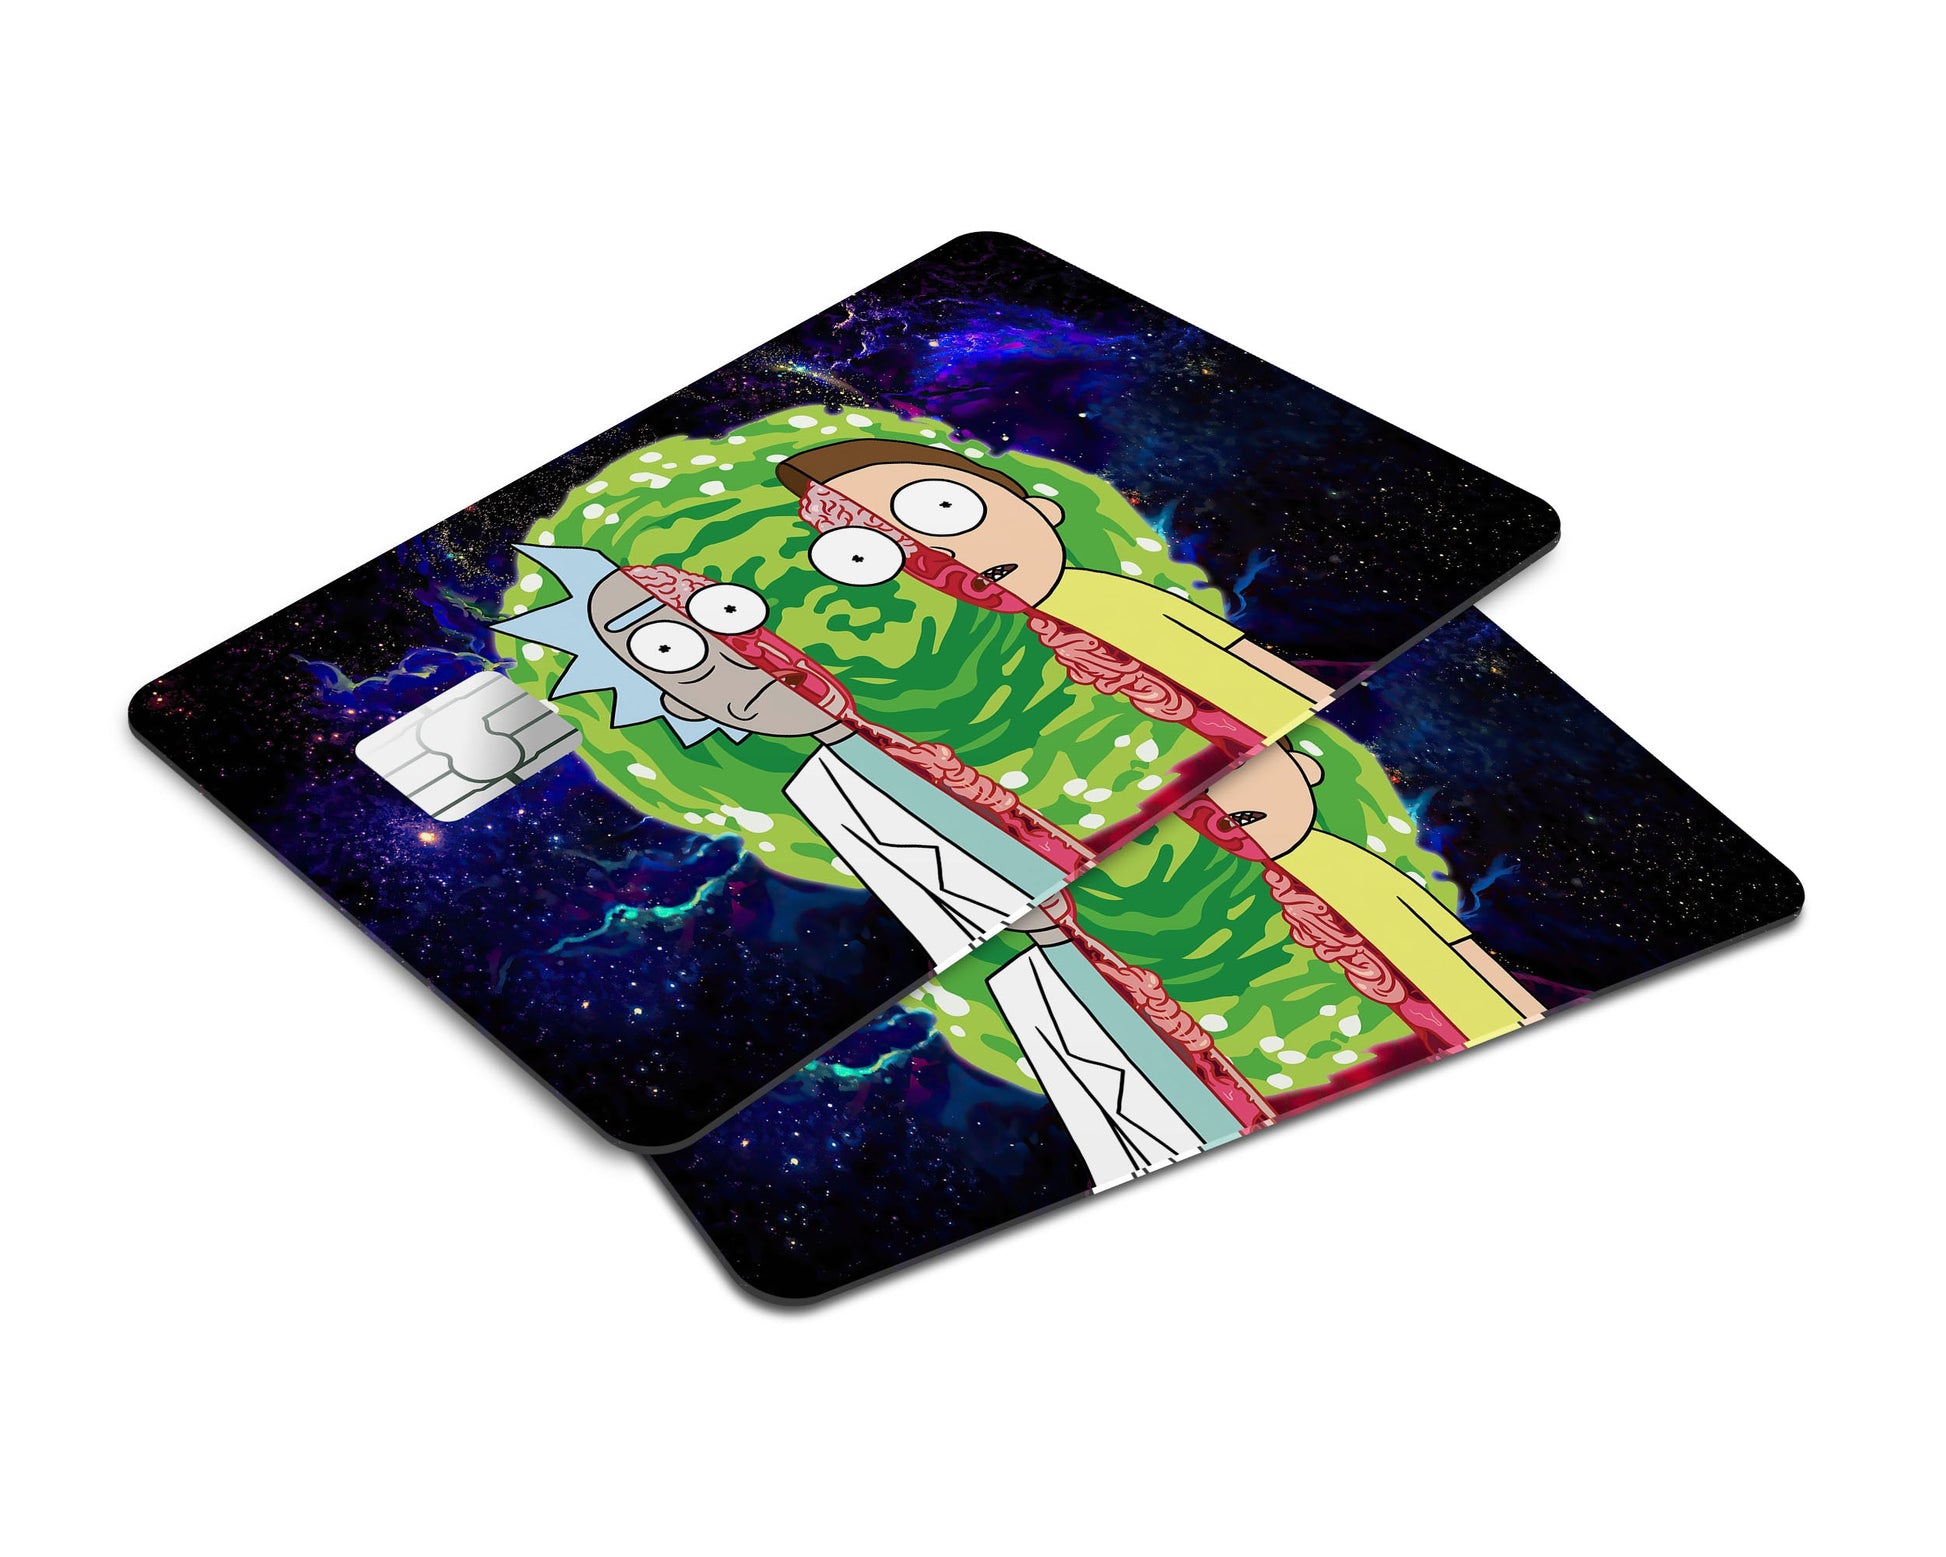 Anime Town Creations Credit Card Rick and Morty Portal Split Window Skins - Anime Rick and Morty Credit Card Skin